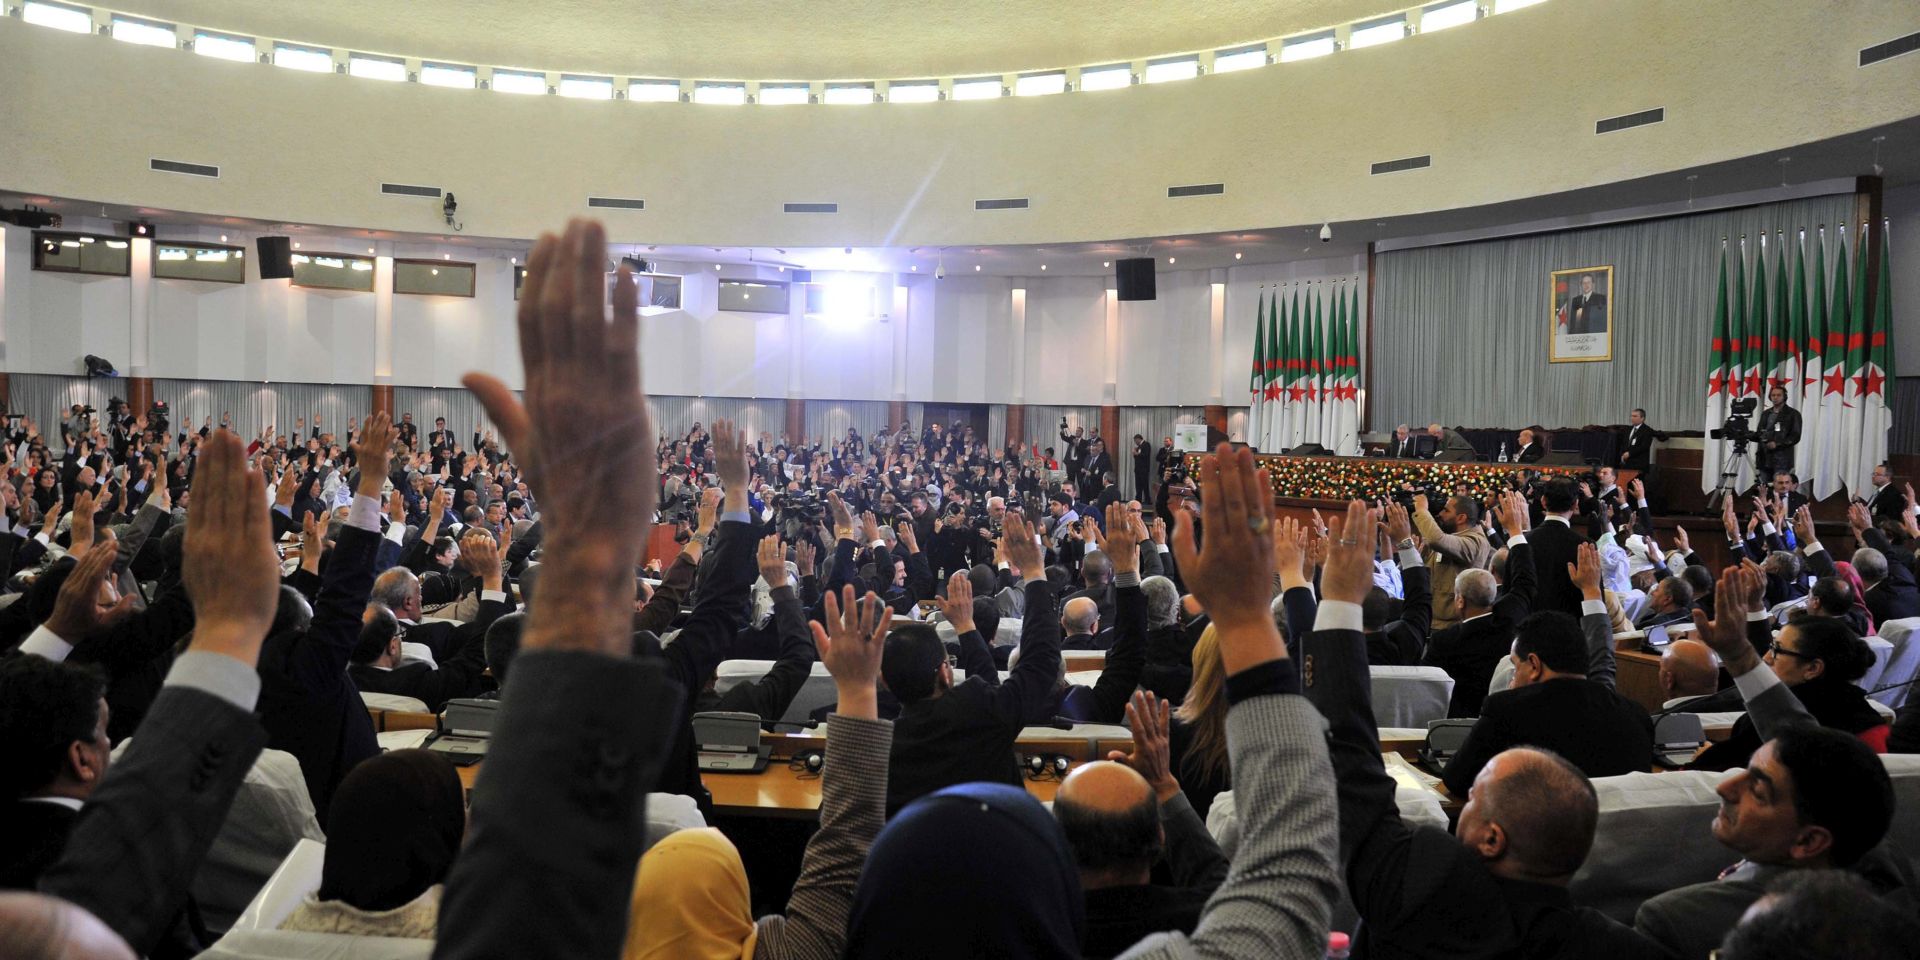 epa05148140 Algerian parliamentarians vote on constitutional changes during a parliament session in Algiers, Algeria, 07 February 2016. Algeria's parliament on 07 February overwhelmingly voted for long-awaited constitutional changes curbing the president's powers. The amendments limit the president's tenure to two five-year terms, give parliament the right to vote on the prime minister whom the president appoints, and recognize the Amazigh language of the minority Berber community.  EPA/STR